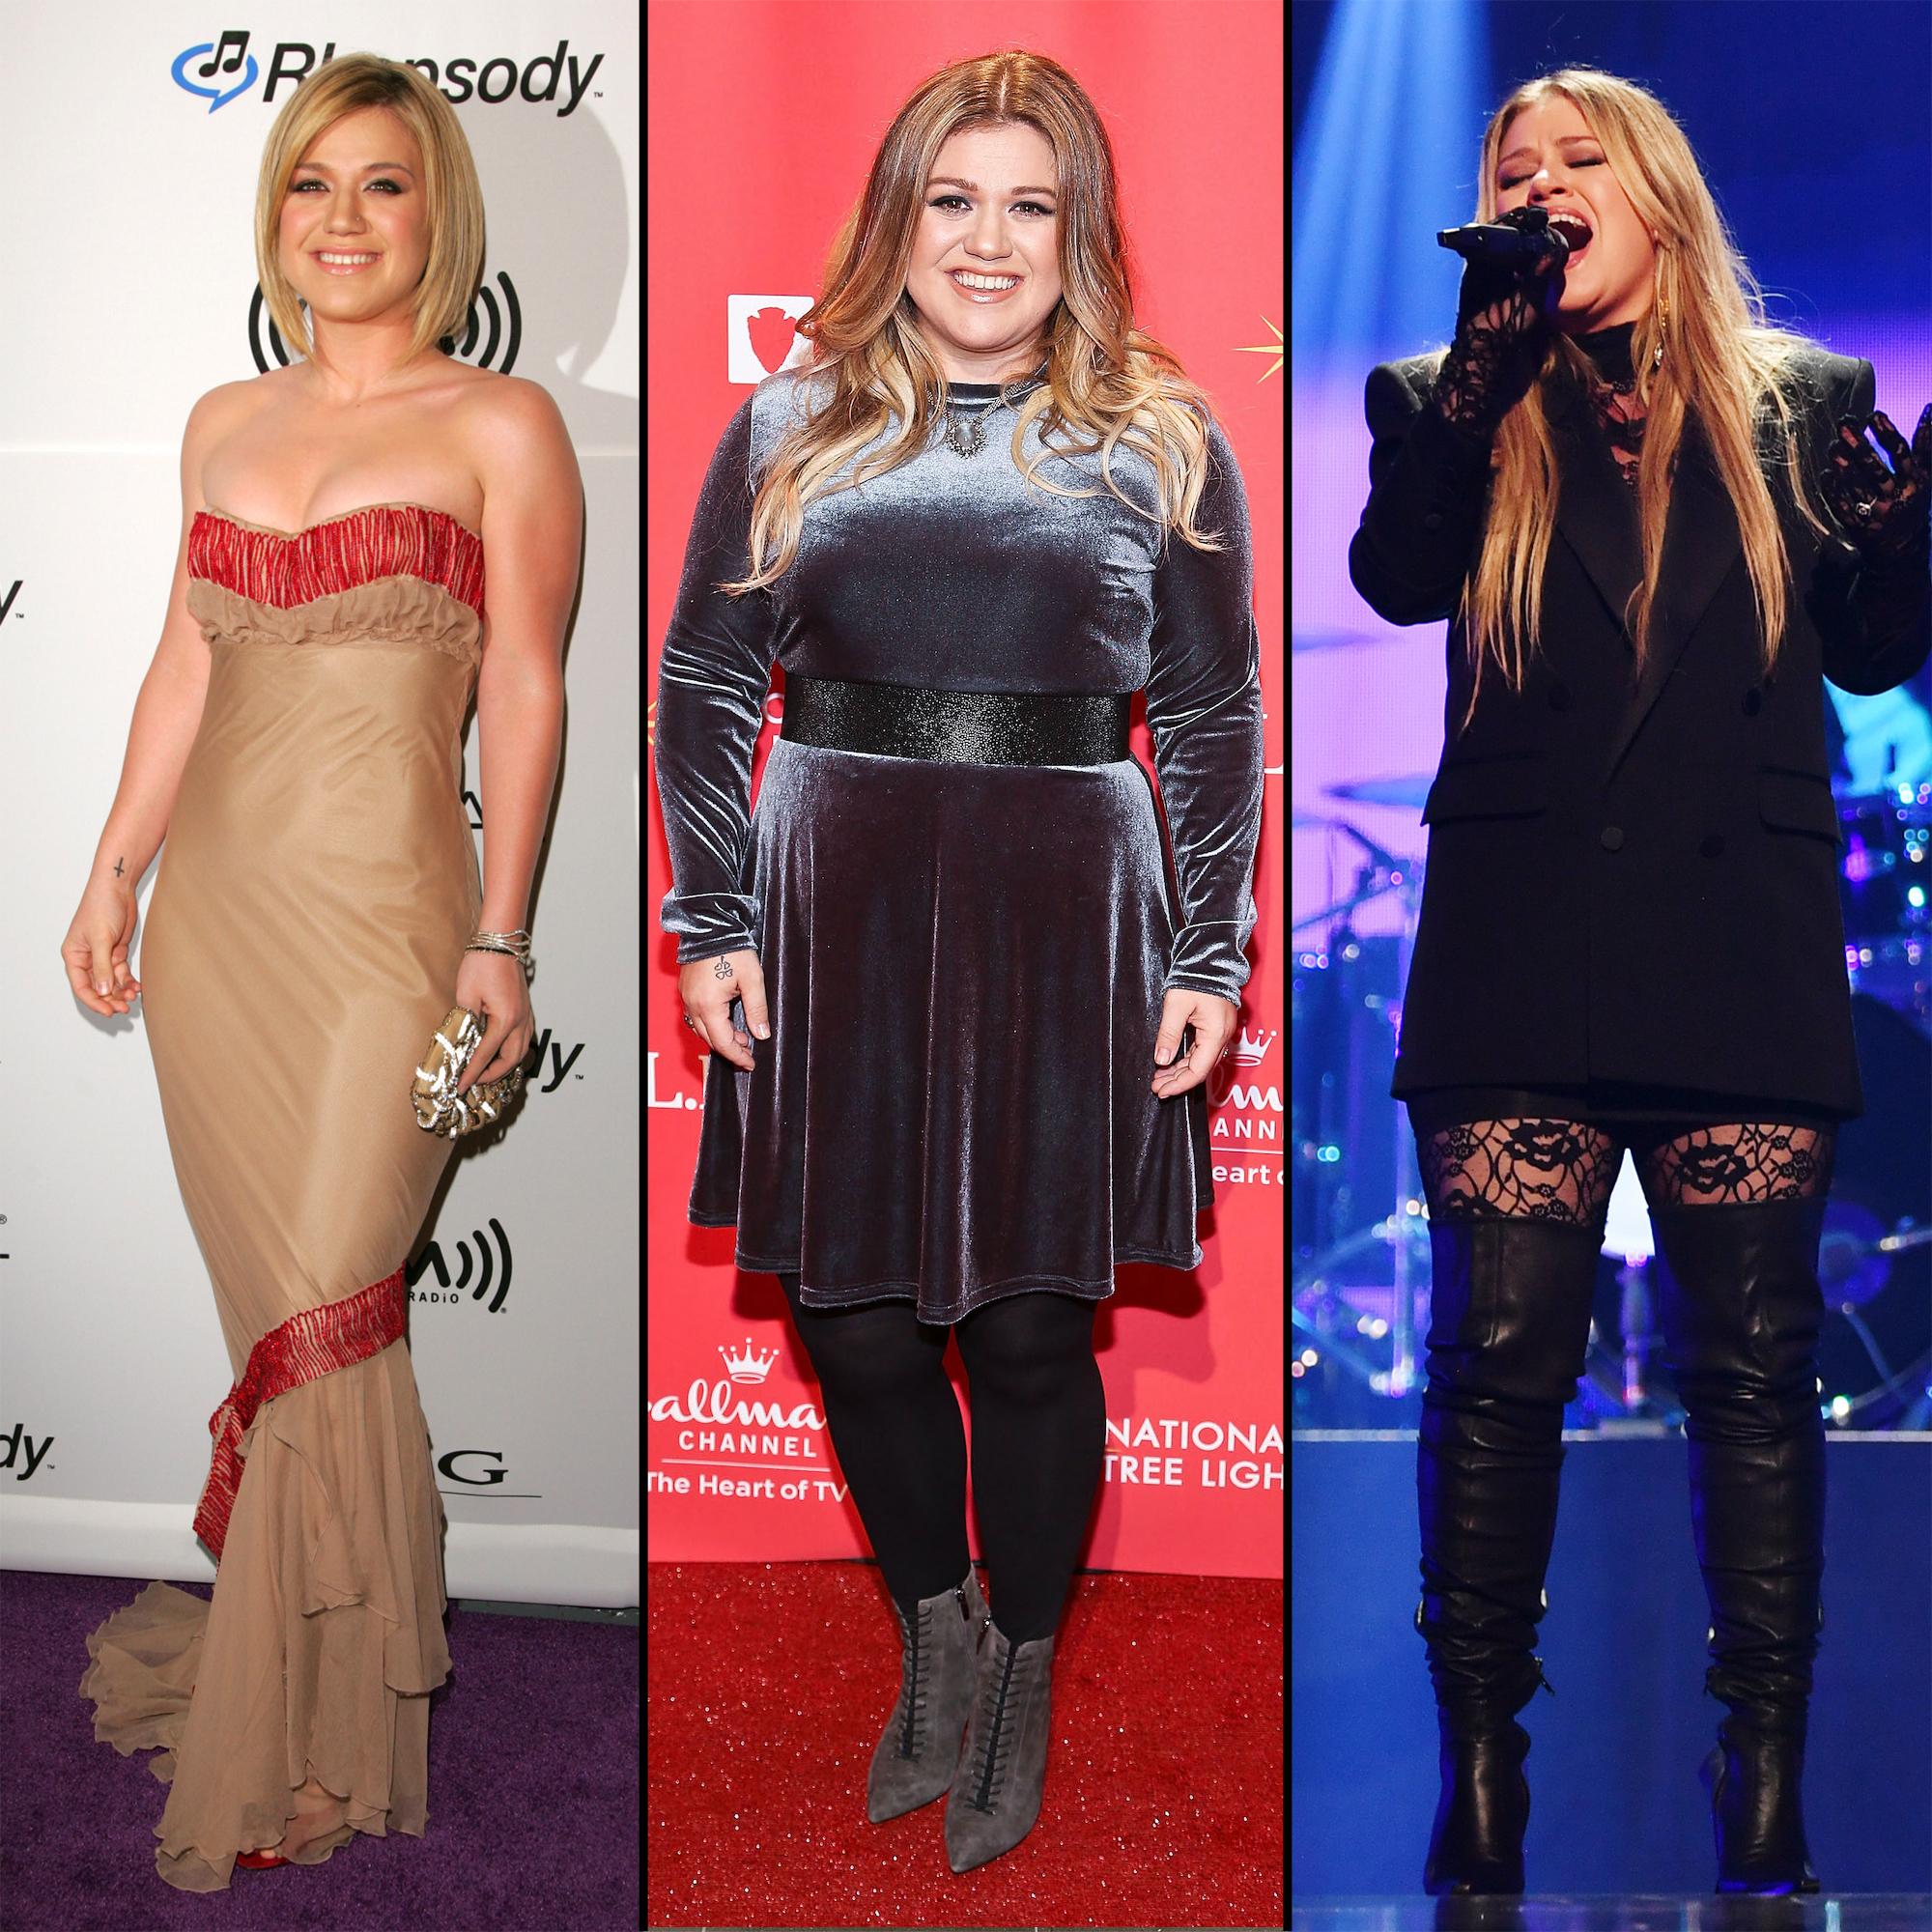 https://www.lifeandstylemag.com/wp-content/uploads/2023/09/Kelly-Clarkson-Weight-Loss-feature.jpg?quality=86&strip=all